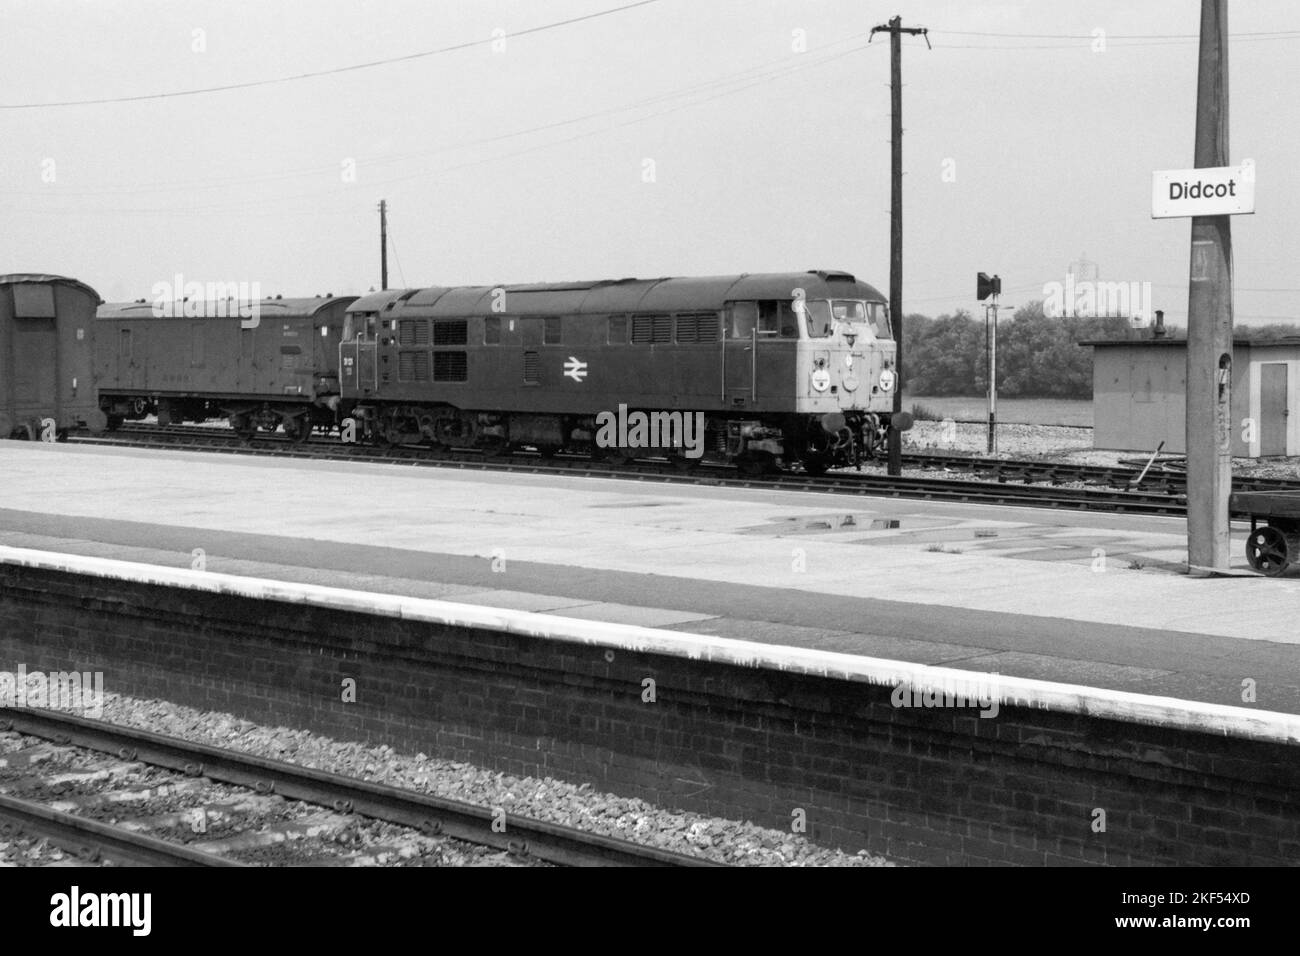 original british rail diesel locomotive class 31 on shunting service didcot late 1970s early 1980s Stock Photo